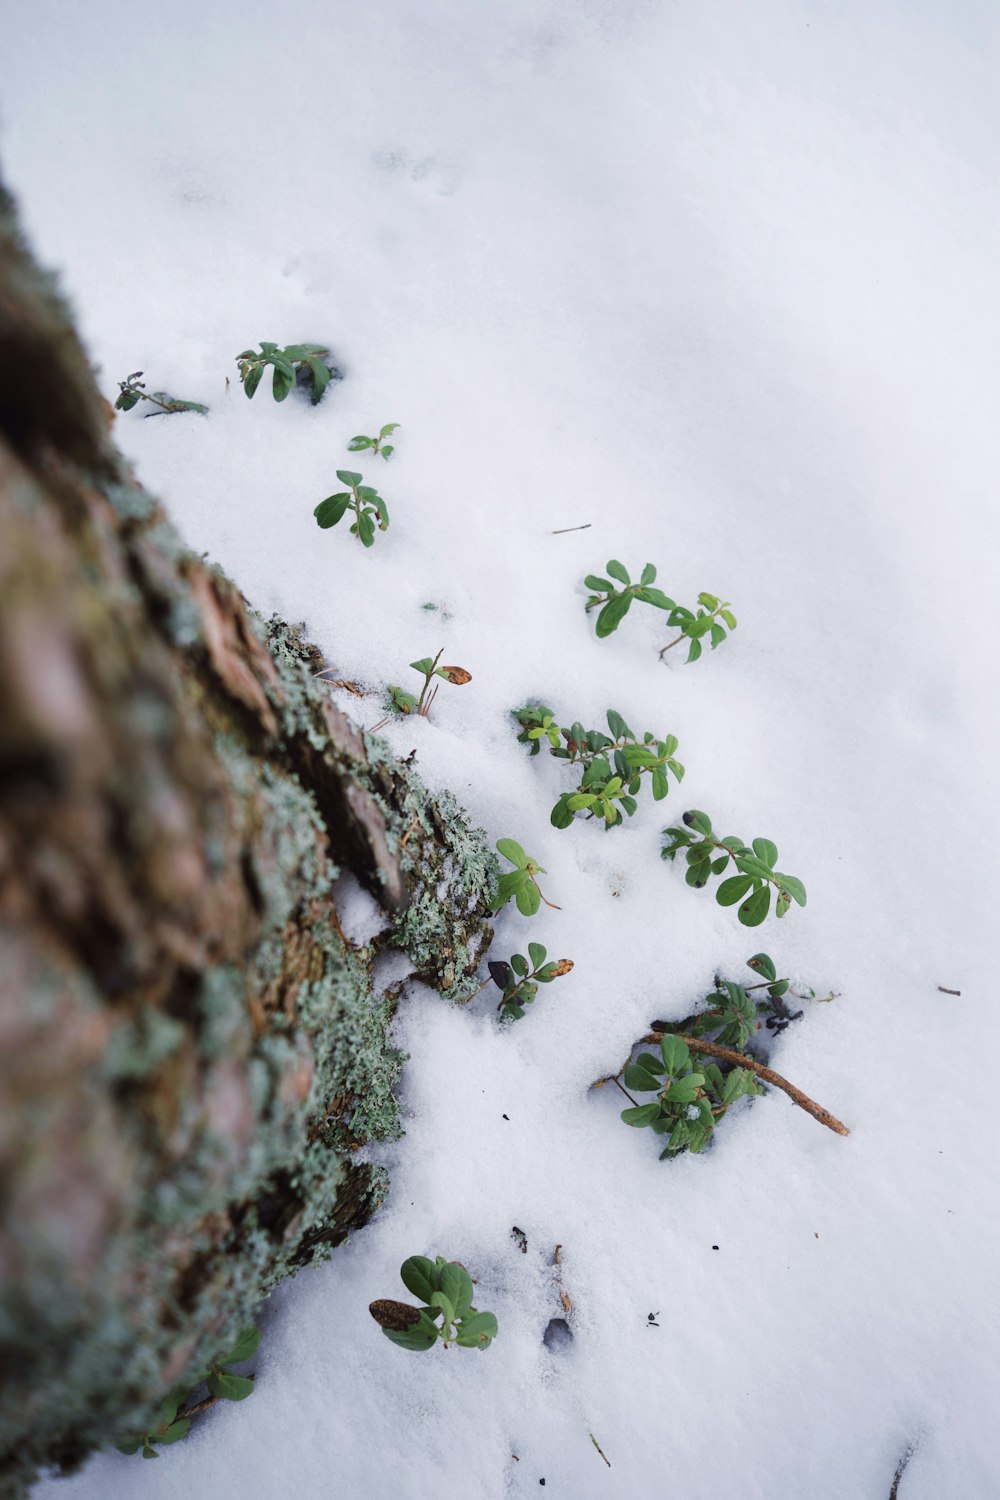 small green plants growing out of the snow